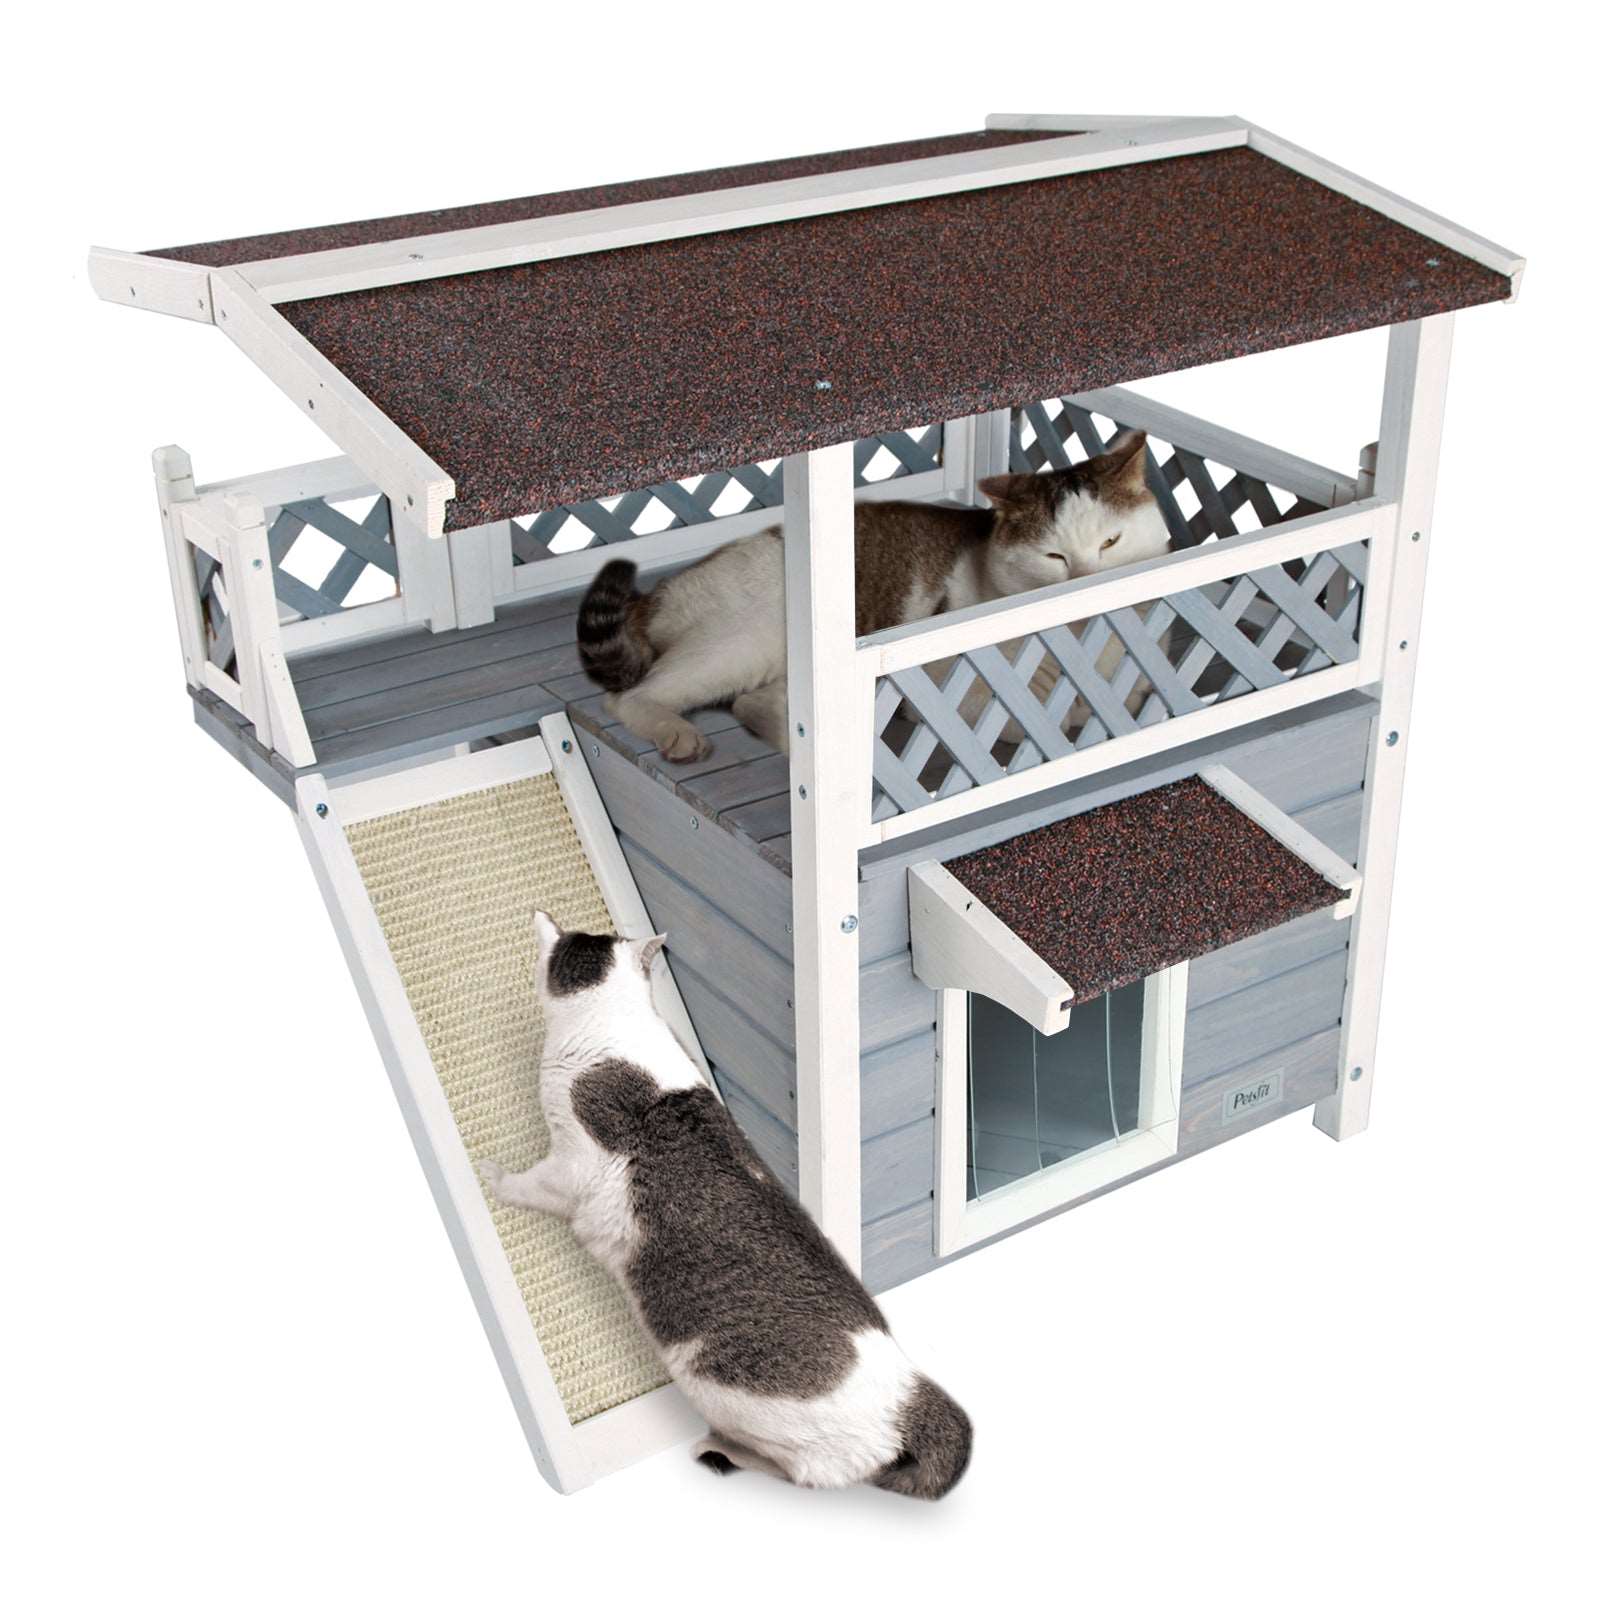 Petsfit-Cat-House-for-Outdoor-Feral-Cat-Shelter-for-1-2-Cats-01